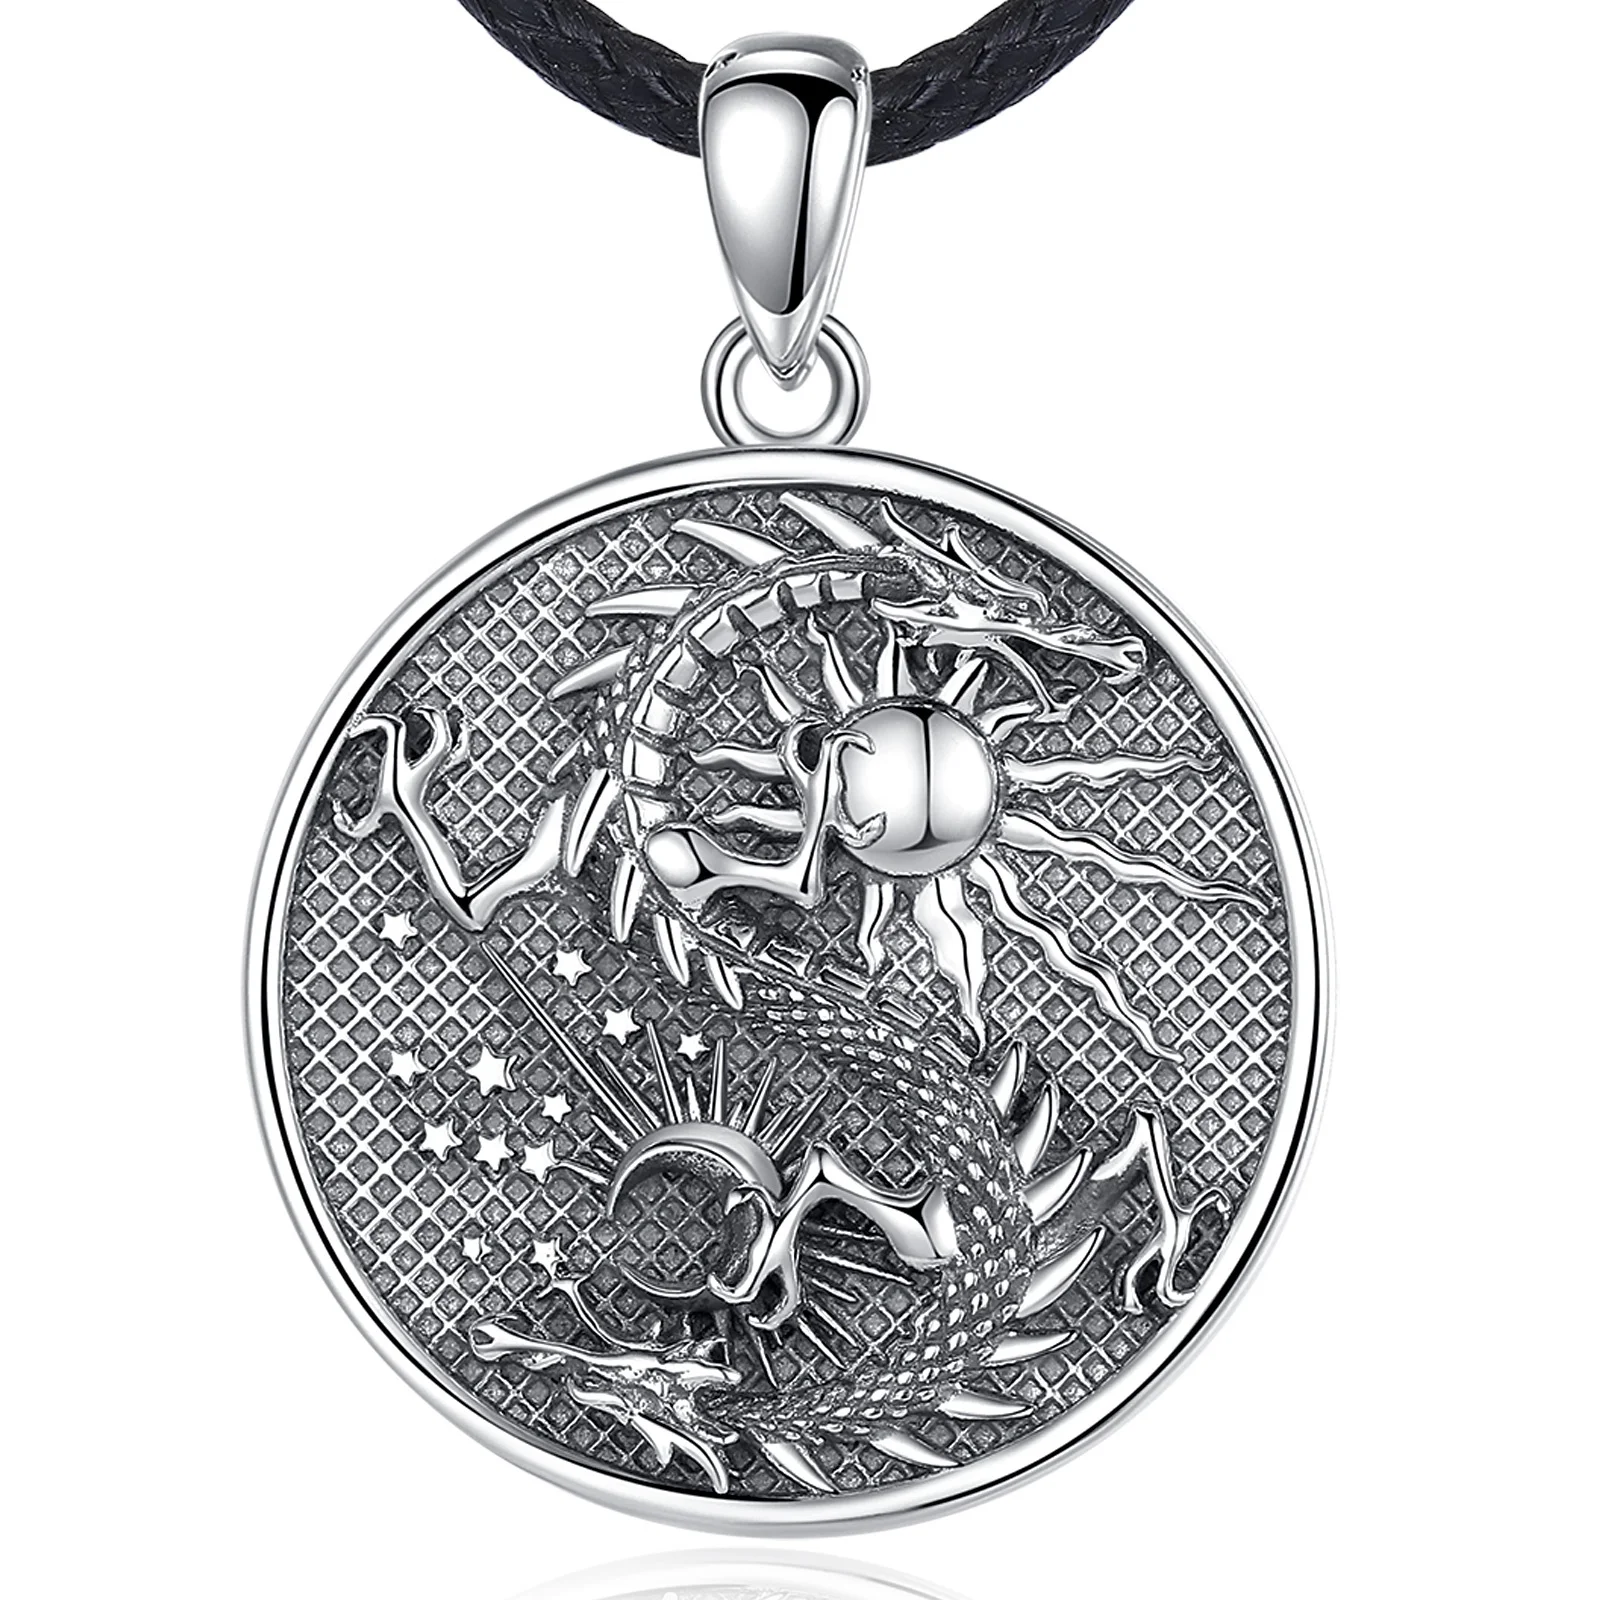 

Merryshine Jewelry Fashion 925 Sterling Silver Engraved Sun and Moon Dragon Amulet Pendant Necklaces for Men